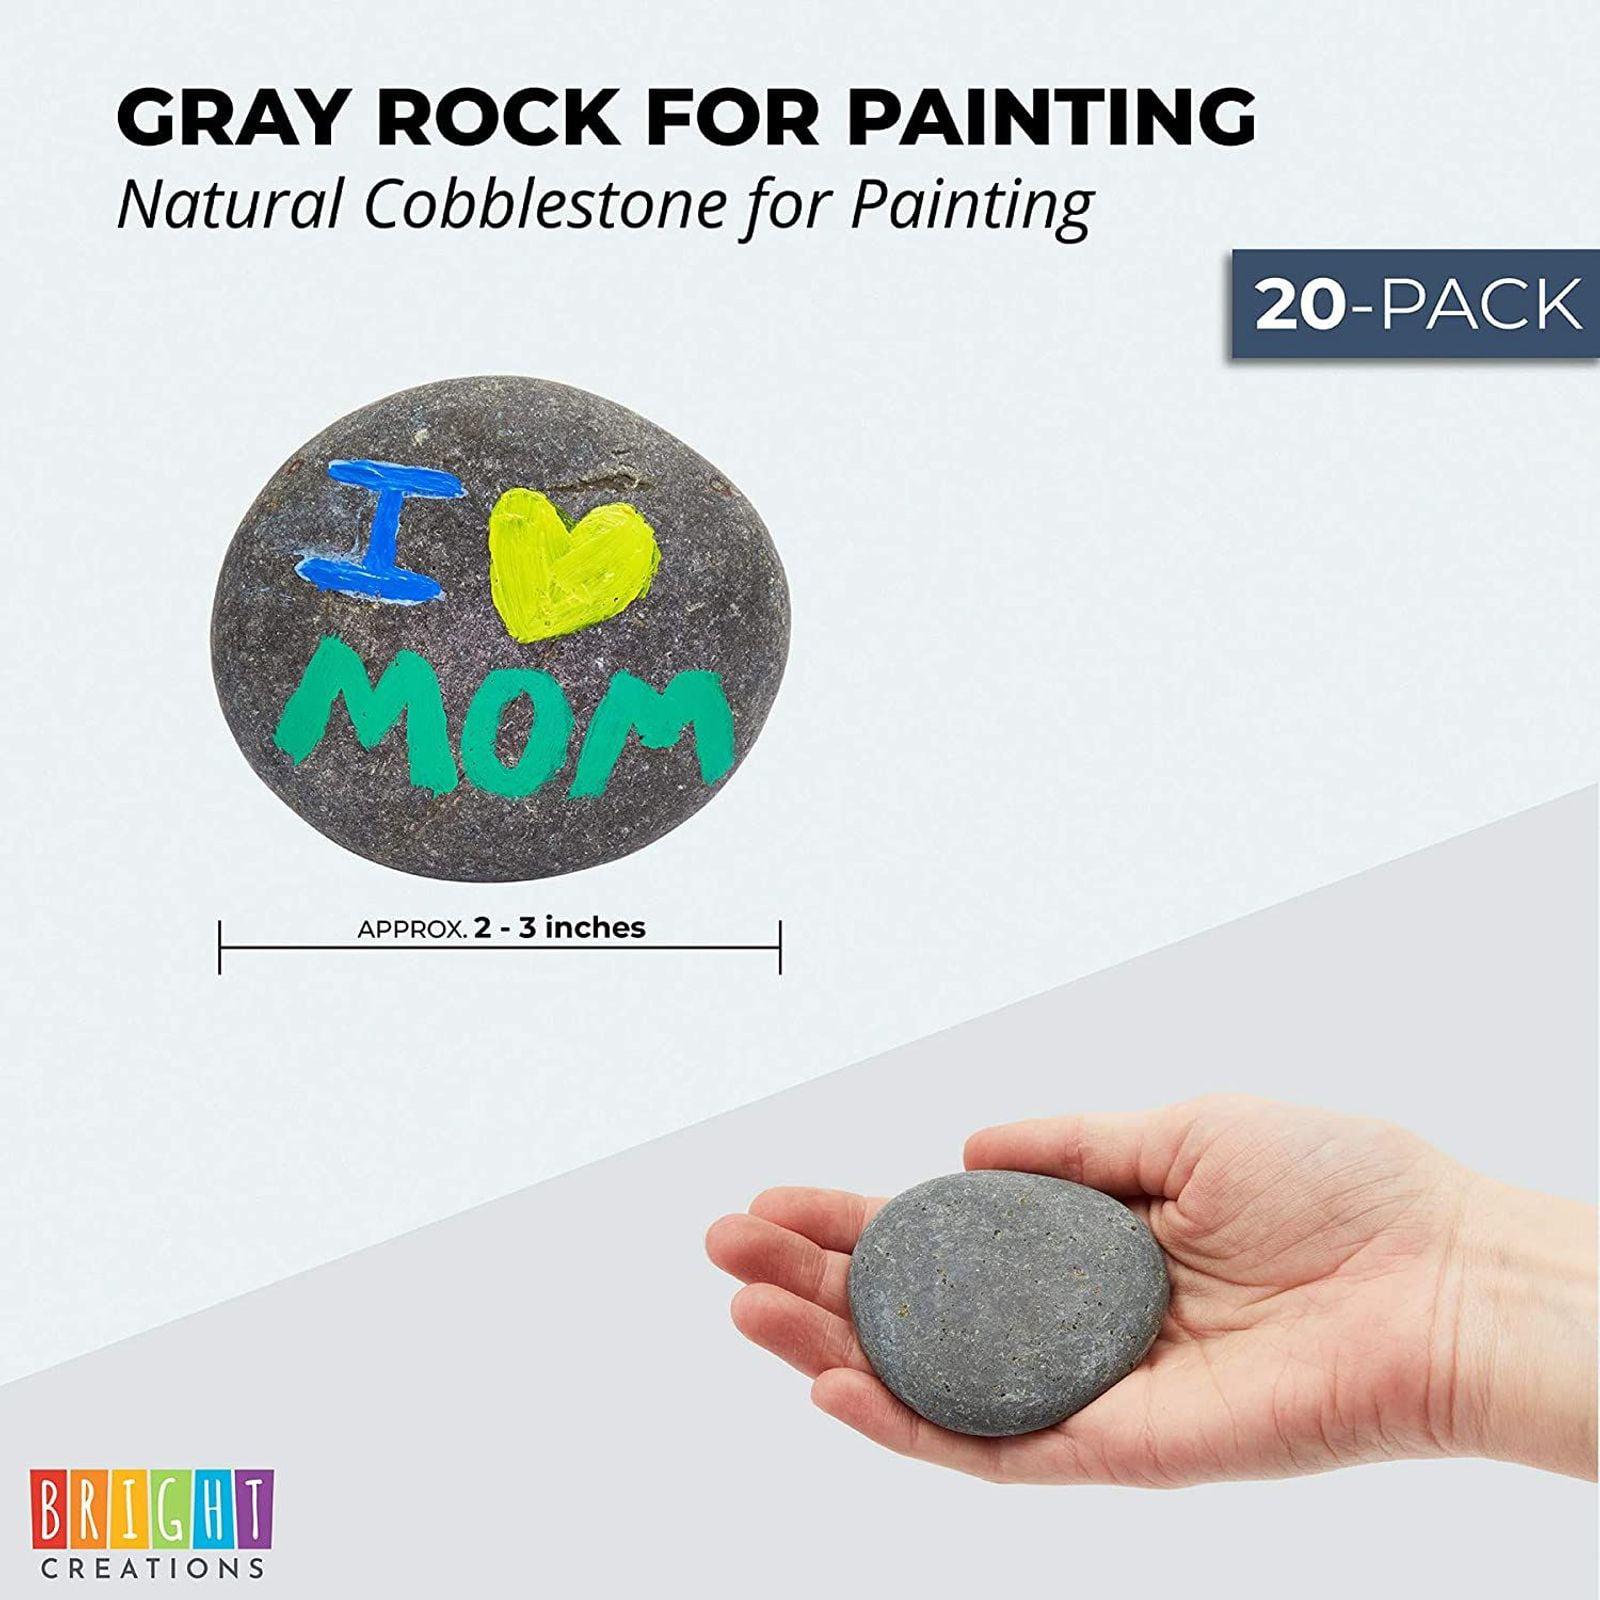 5-7cm&7-10cm Crafts Paint Stones for Kids Arts Smooth Rocks Painting Painting DIY Crafts Natural River Stones 20 Pcs Rocks Painting Flat Stones for Painting Painting Rock Natural River Stone